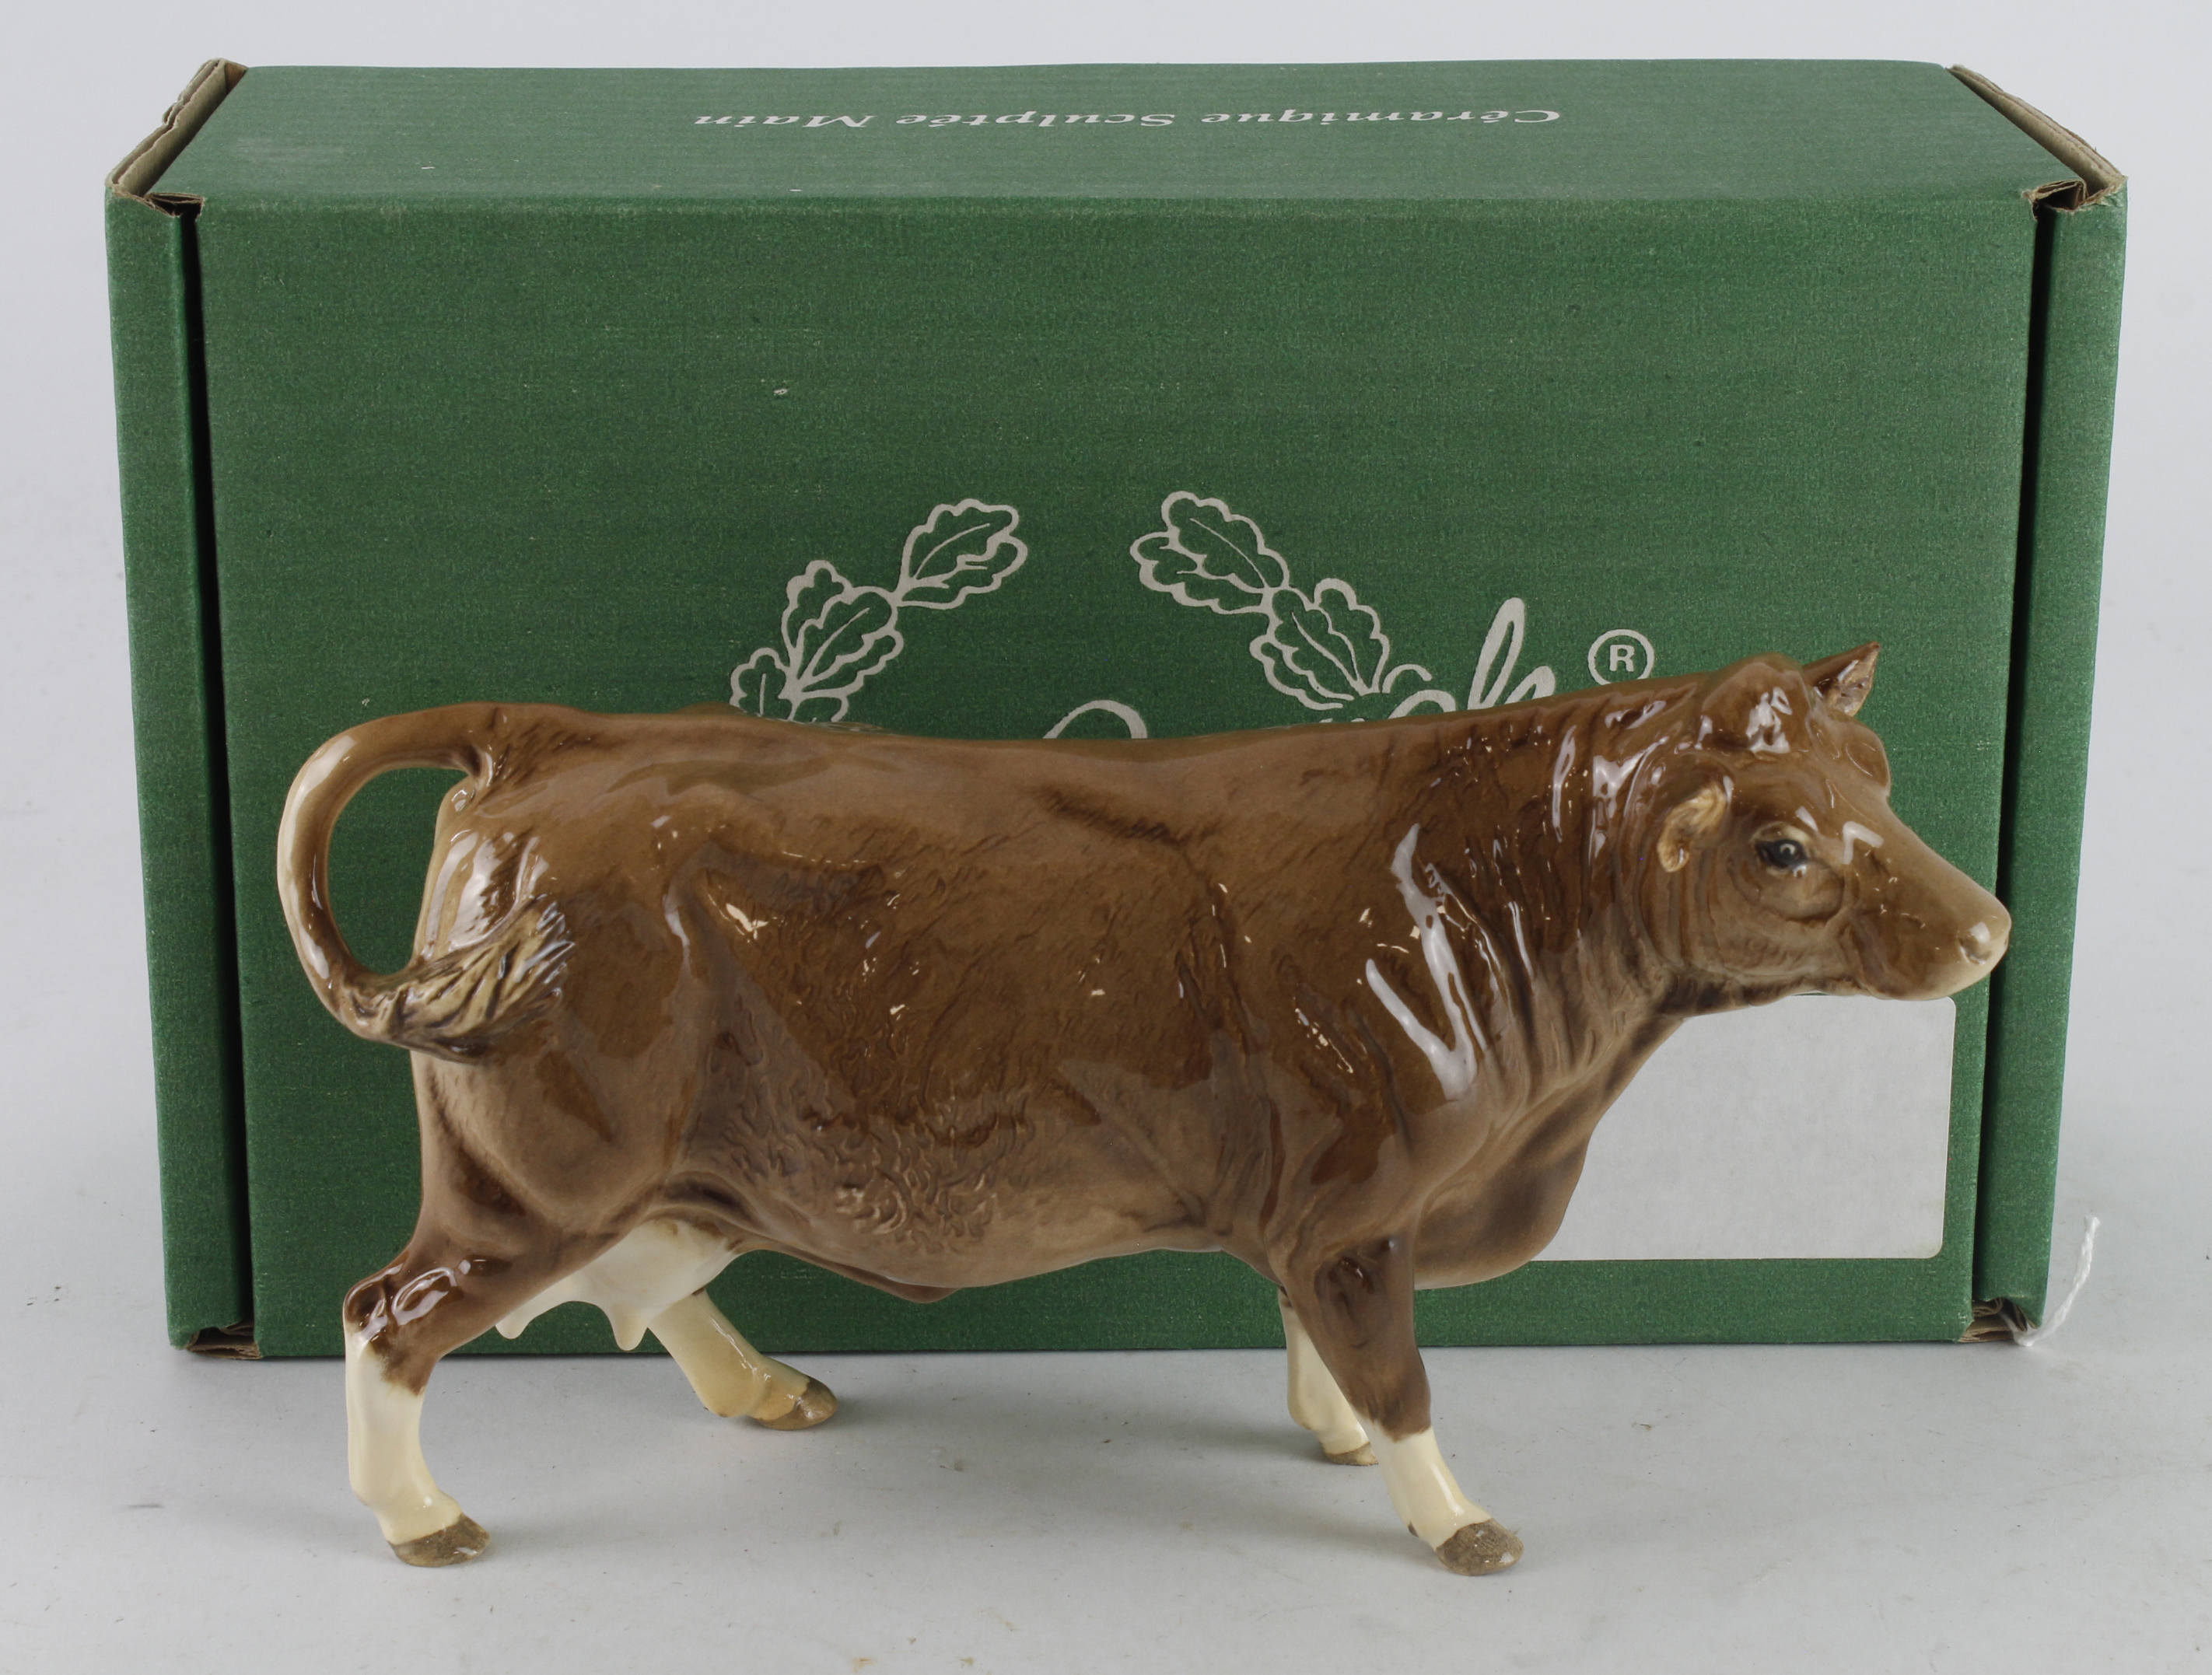 Beswick figure 'Limousin Cow' (BCC 1998), height 10.5cm approx., contained in original box